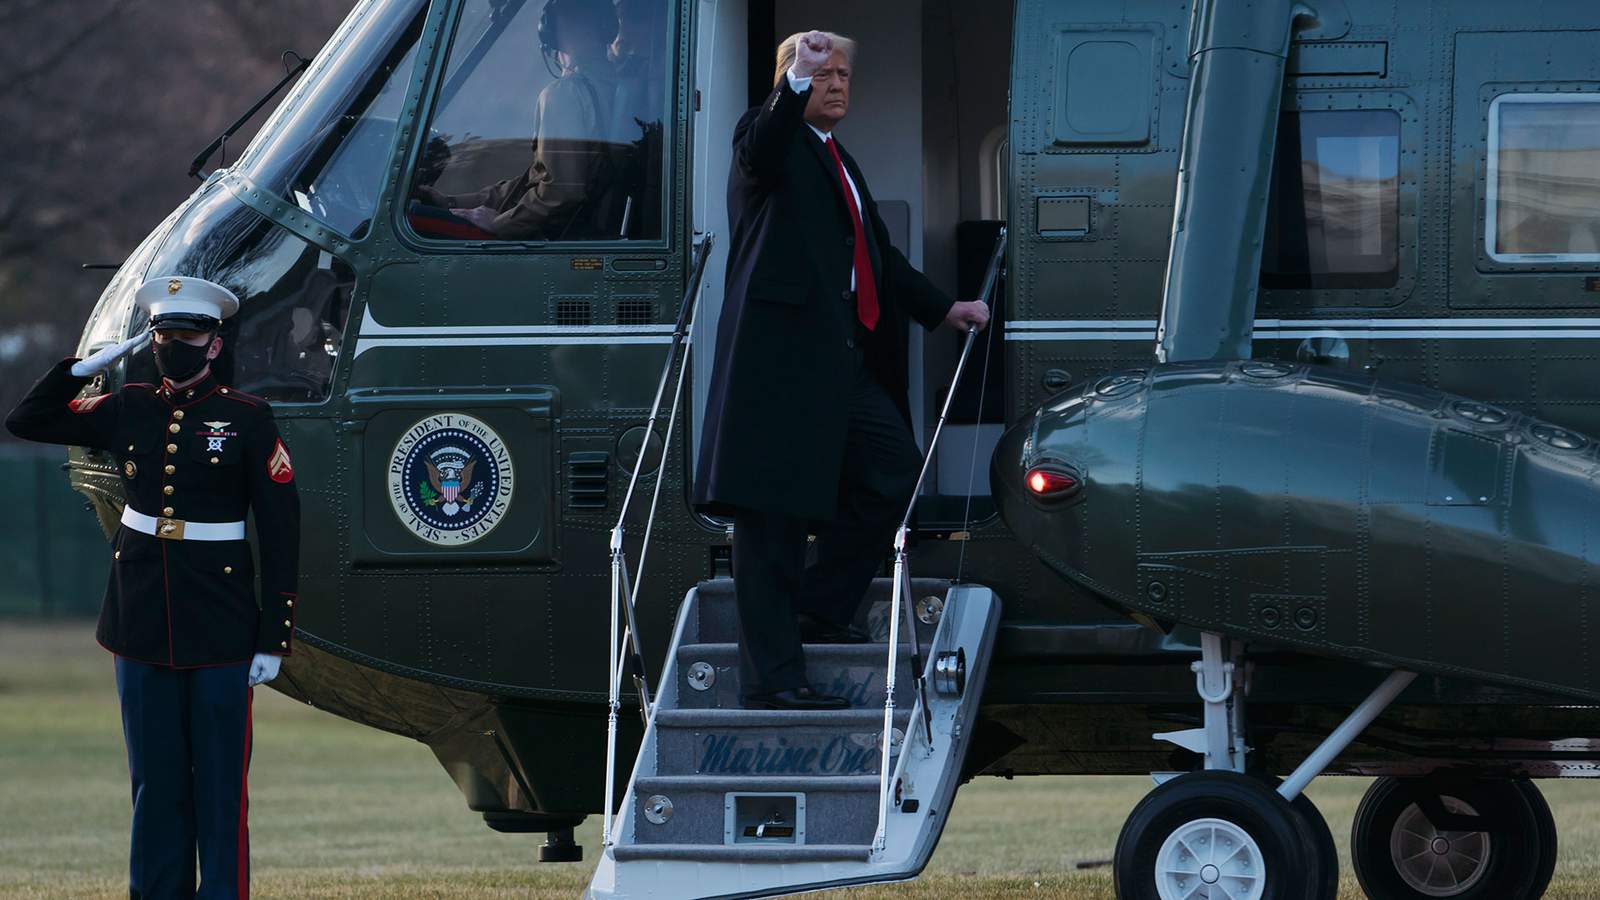 WATCH: President Trump departure ceremony at Joint Base Andrews